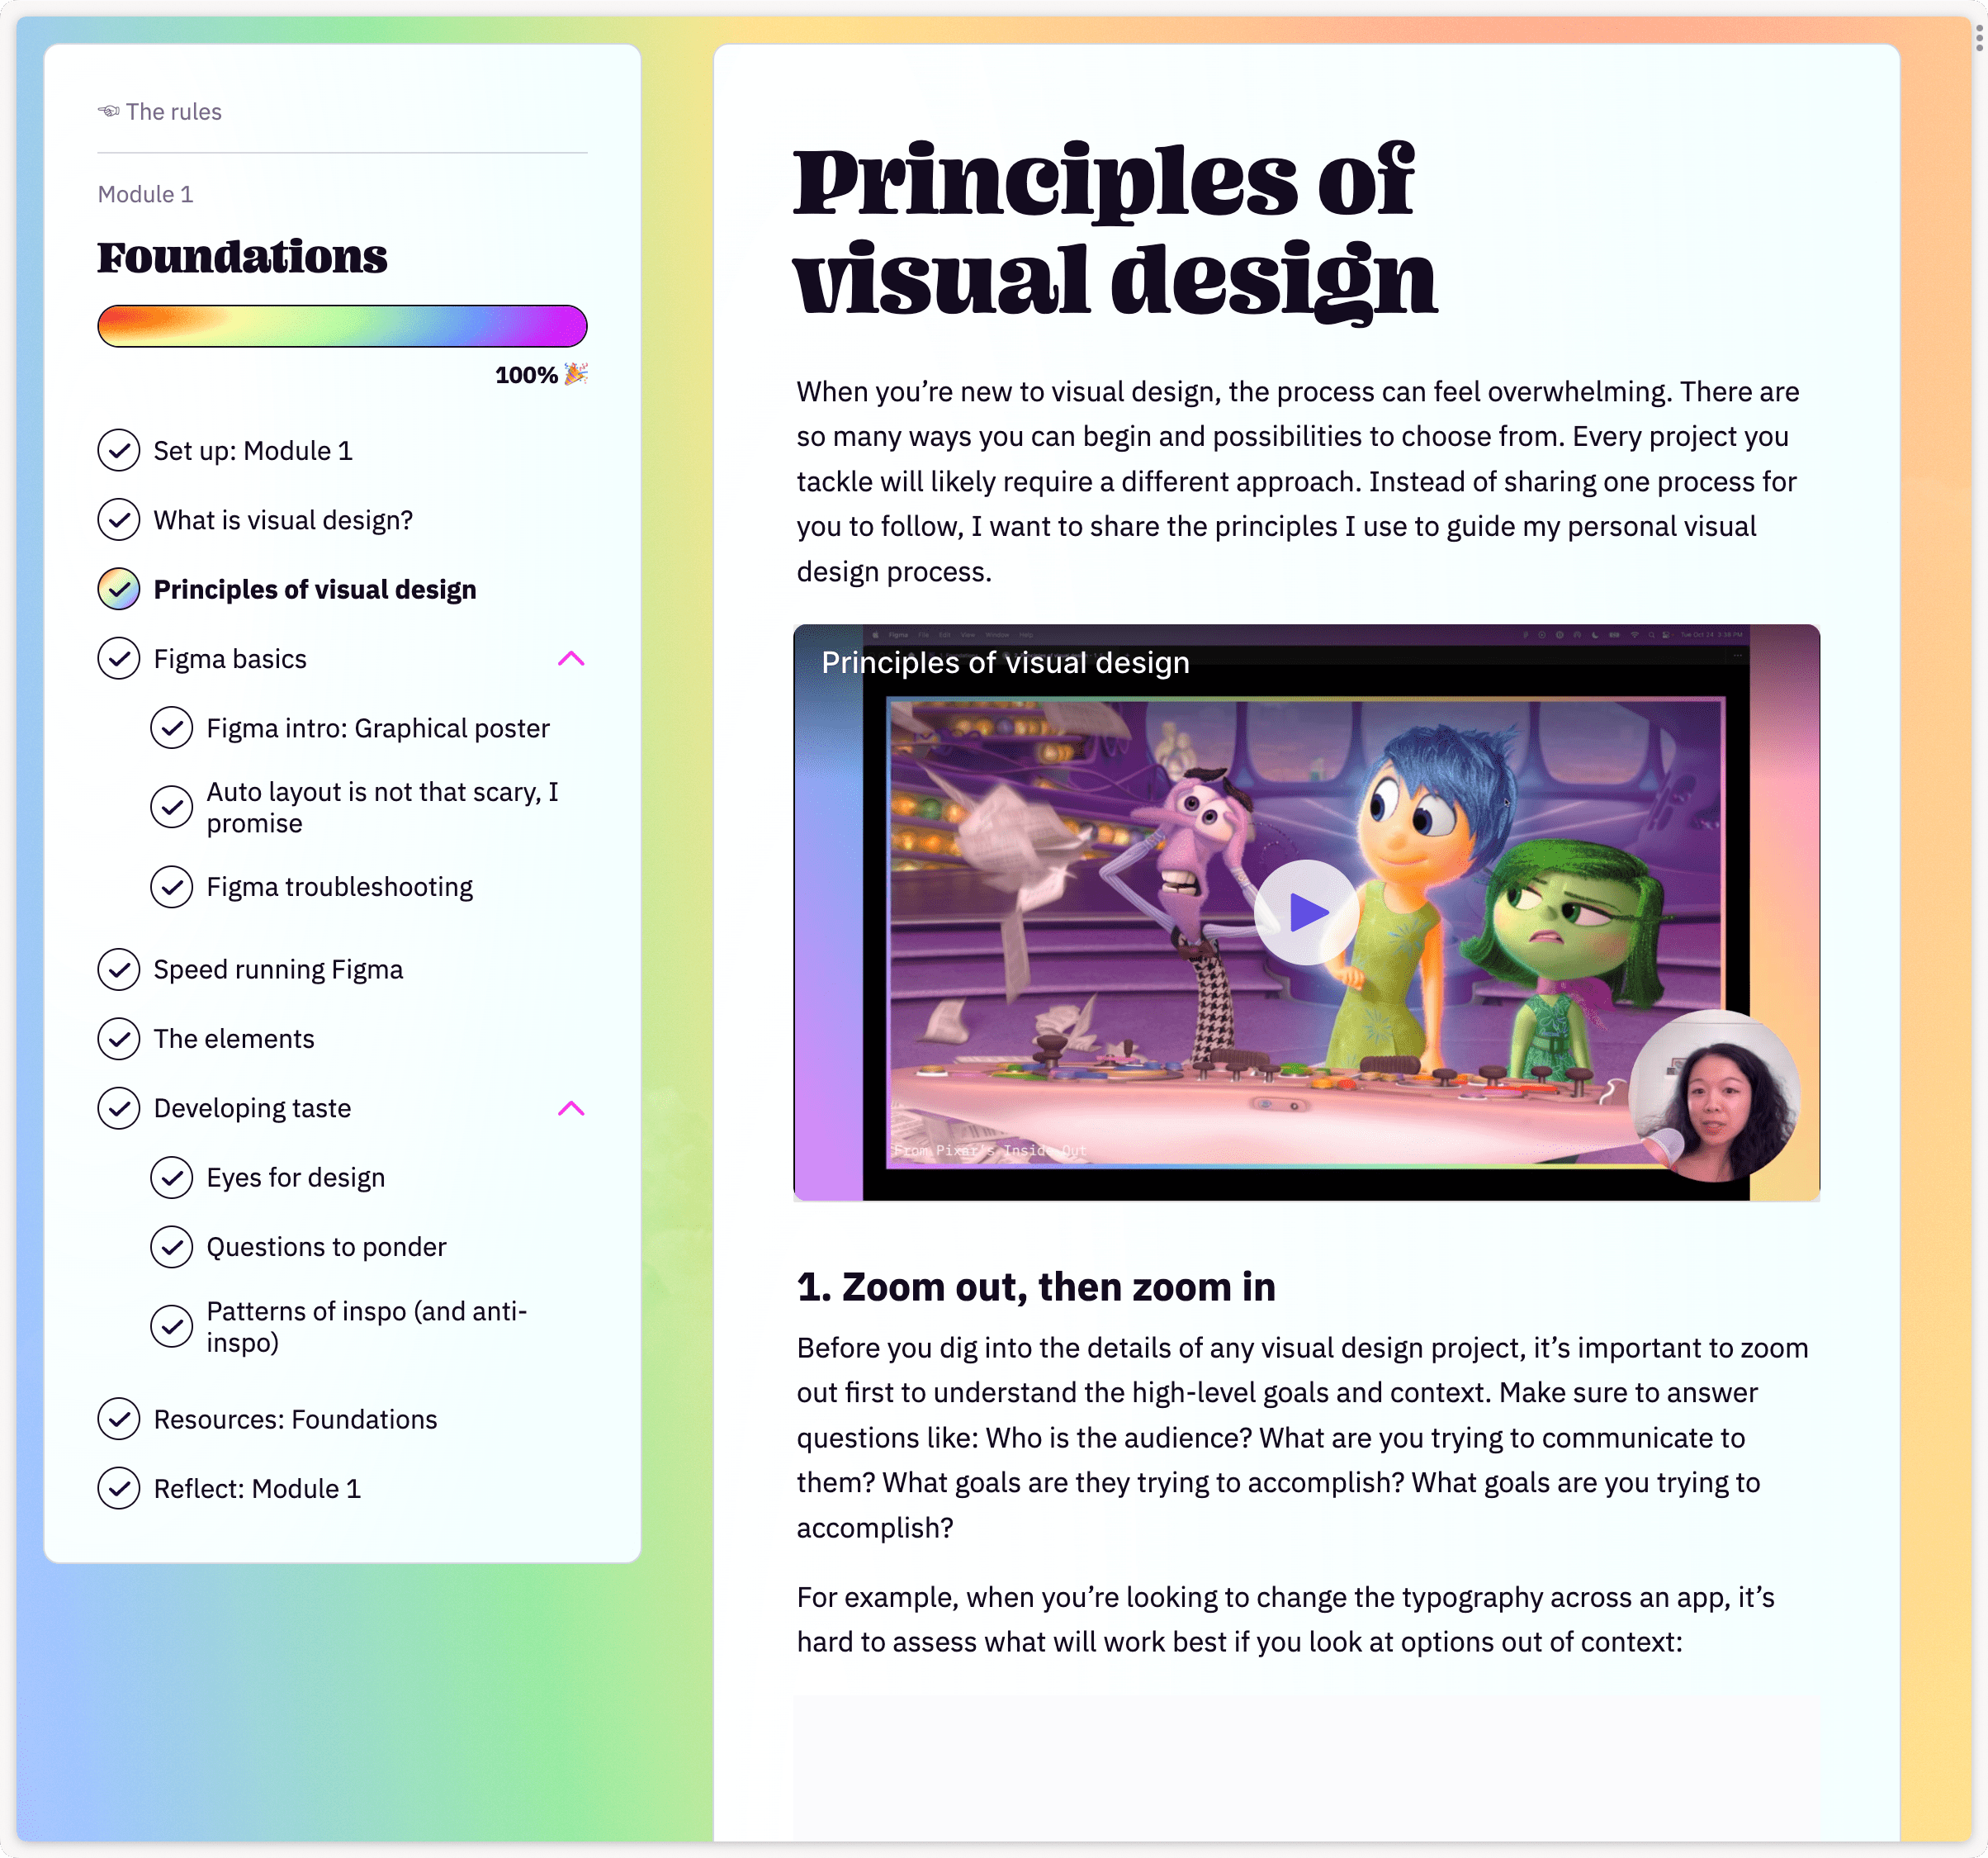 Screenshot of The Art of Visual Design website focused on the Principles of Visual Design lesson. The lesson features a video by me! There'salso a sidebar with all the lessons in module 1: What is visual design? Principles of visual design. Figma basics. Graphical poster. Auto layout. Figma troubleshooting. Speed running Figma.